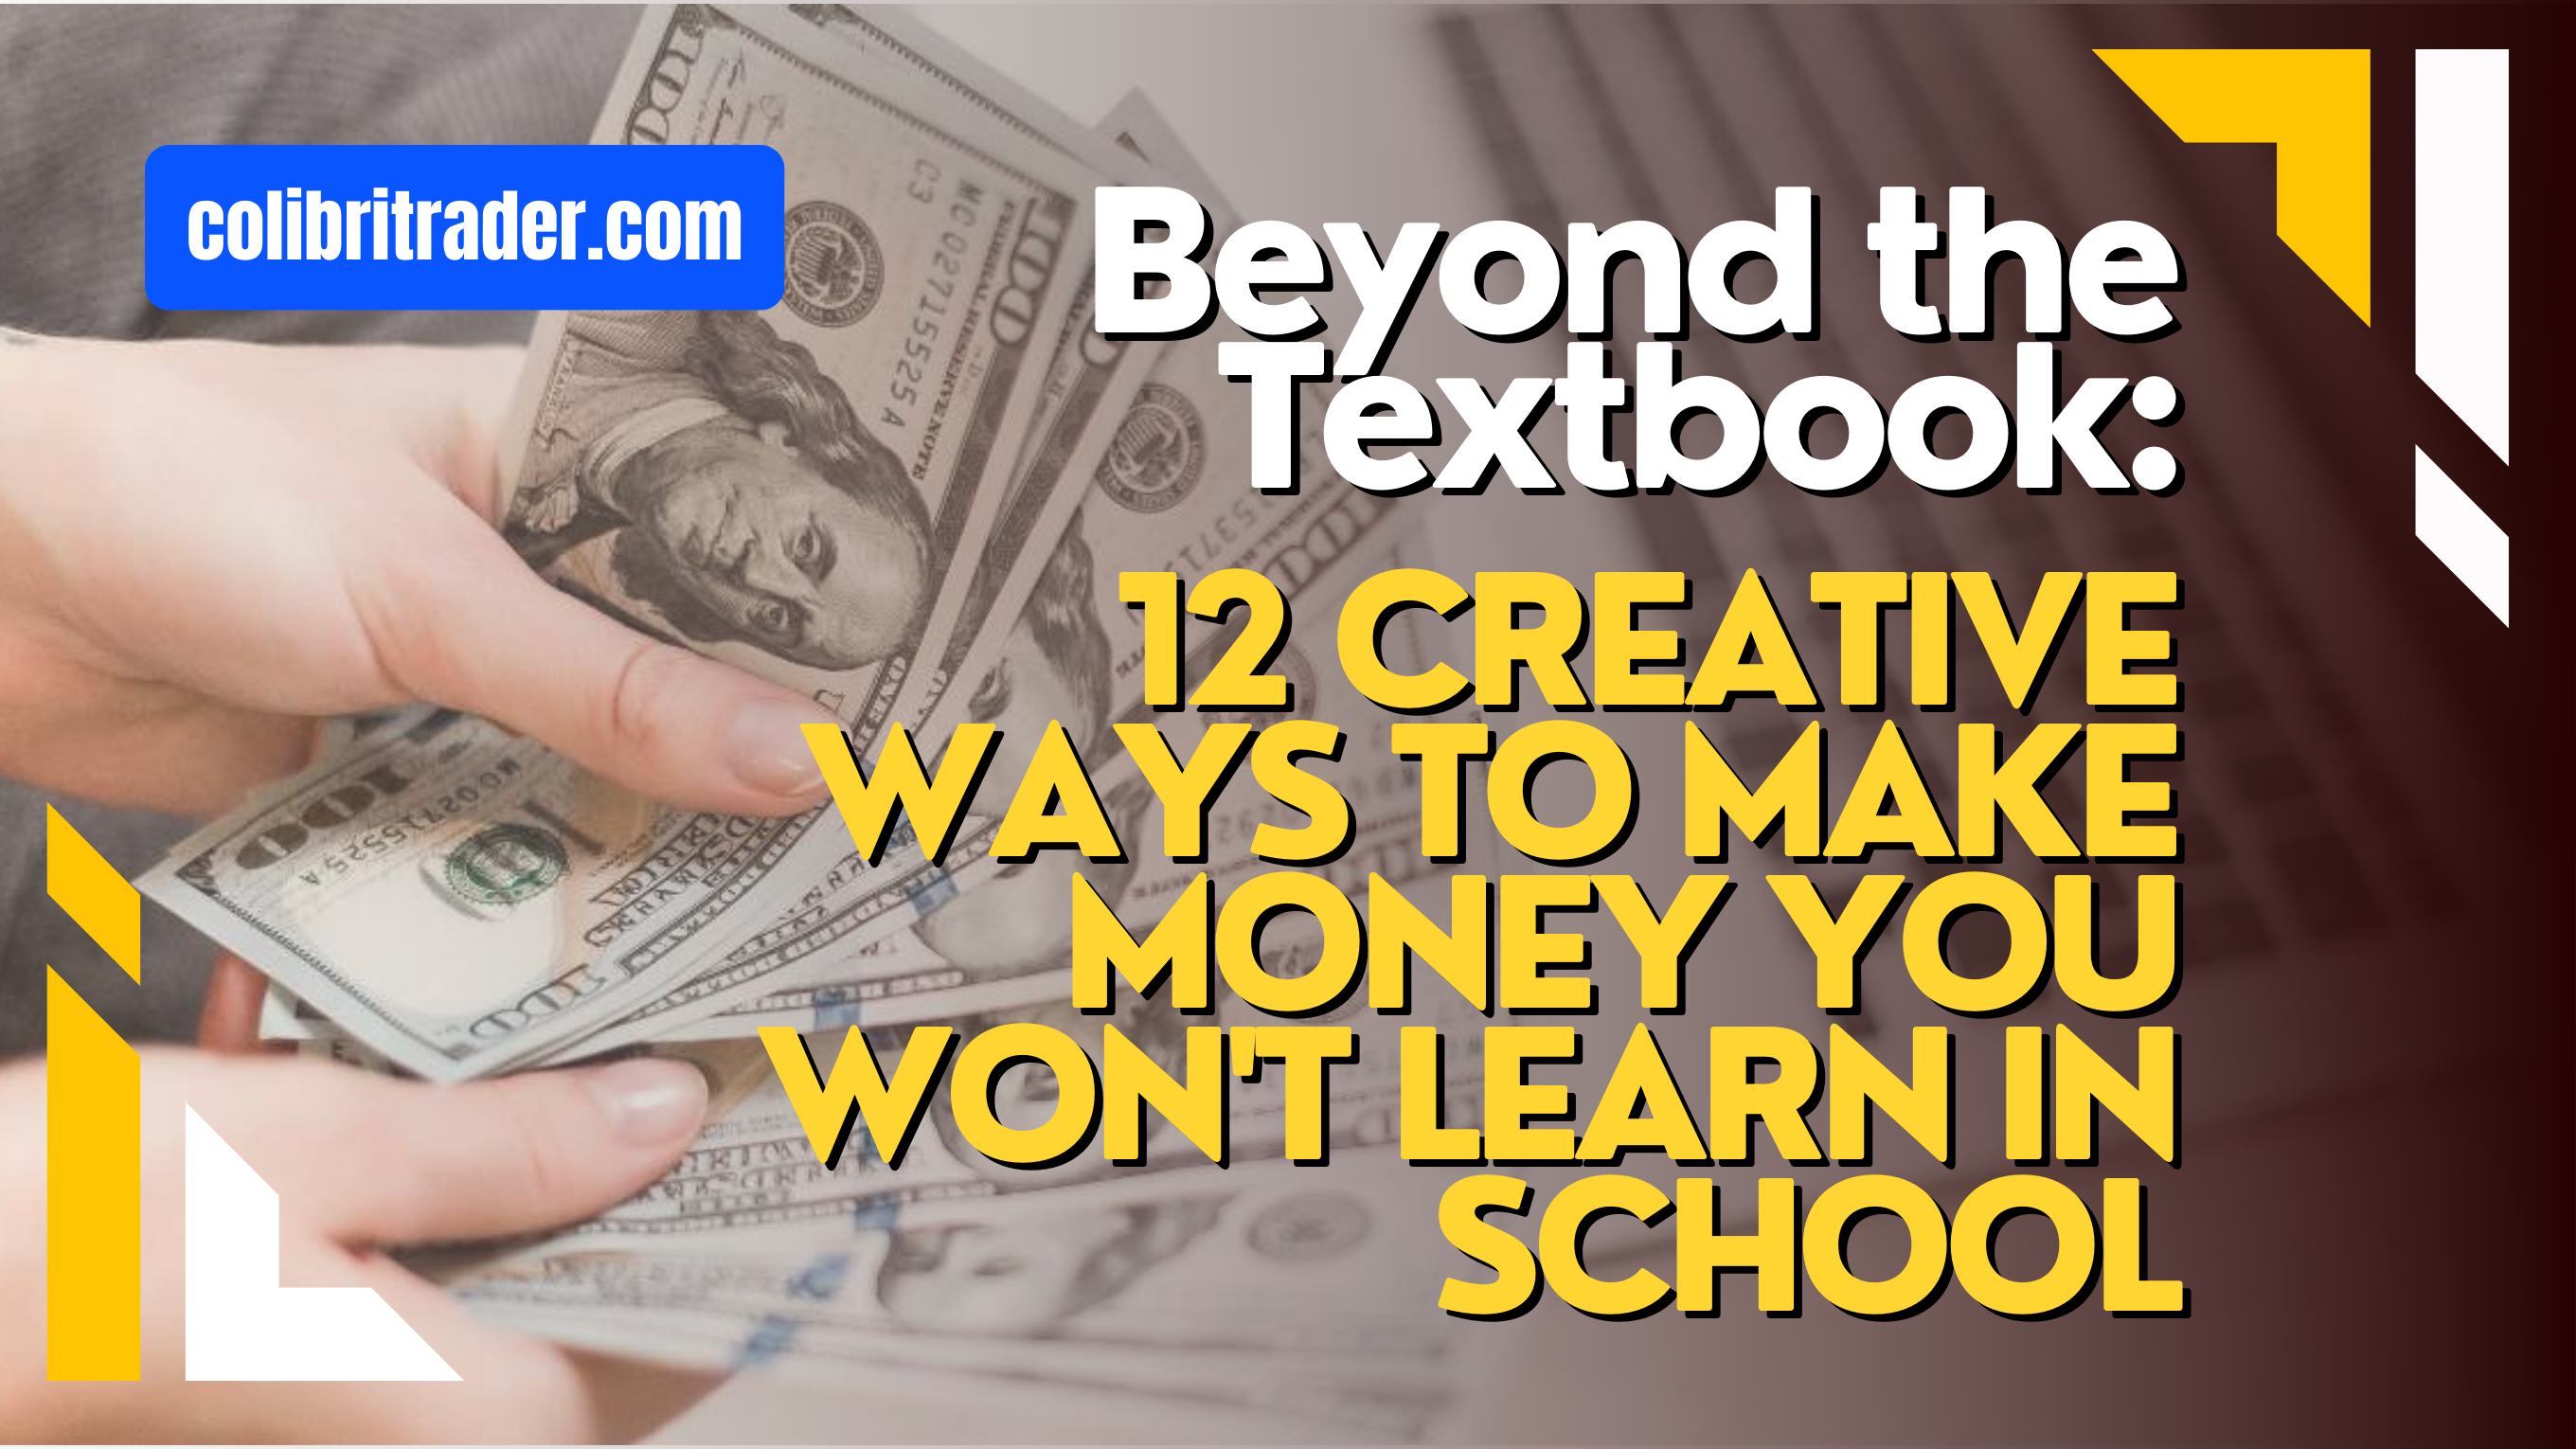 Beyond the Textbook: 12 Creative Ways to Make Money You Won't Learn in School